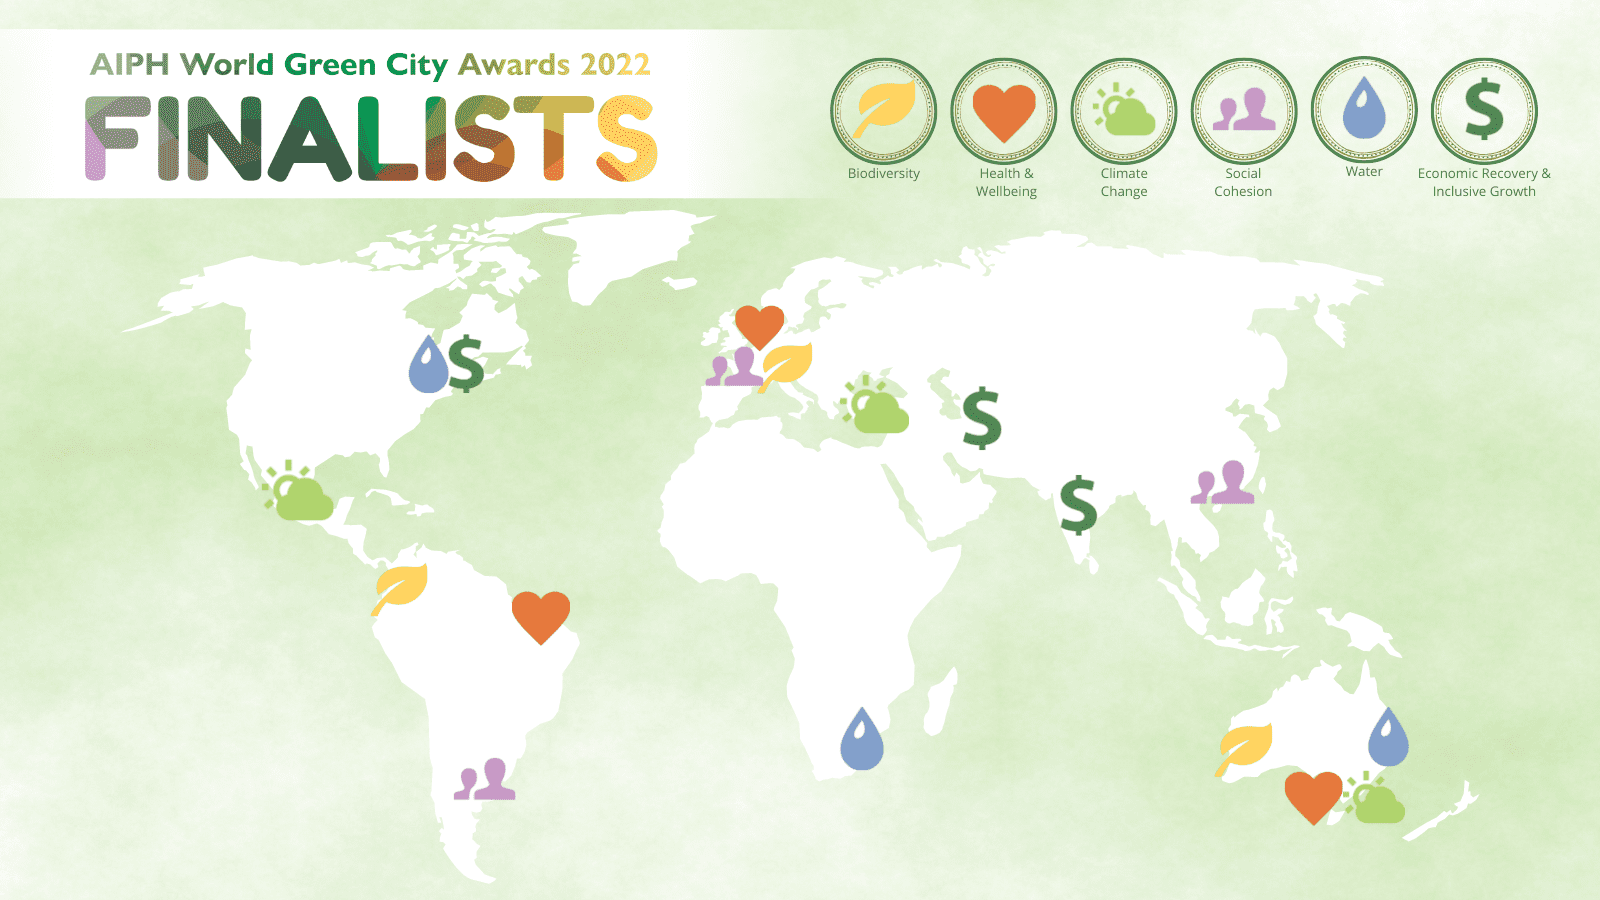 A map showing the location of the AIPH World Green City Awards 2022 finalists